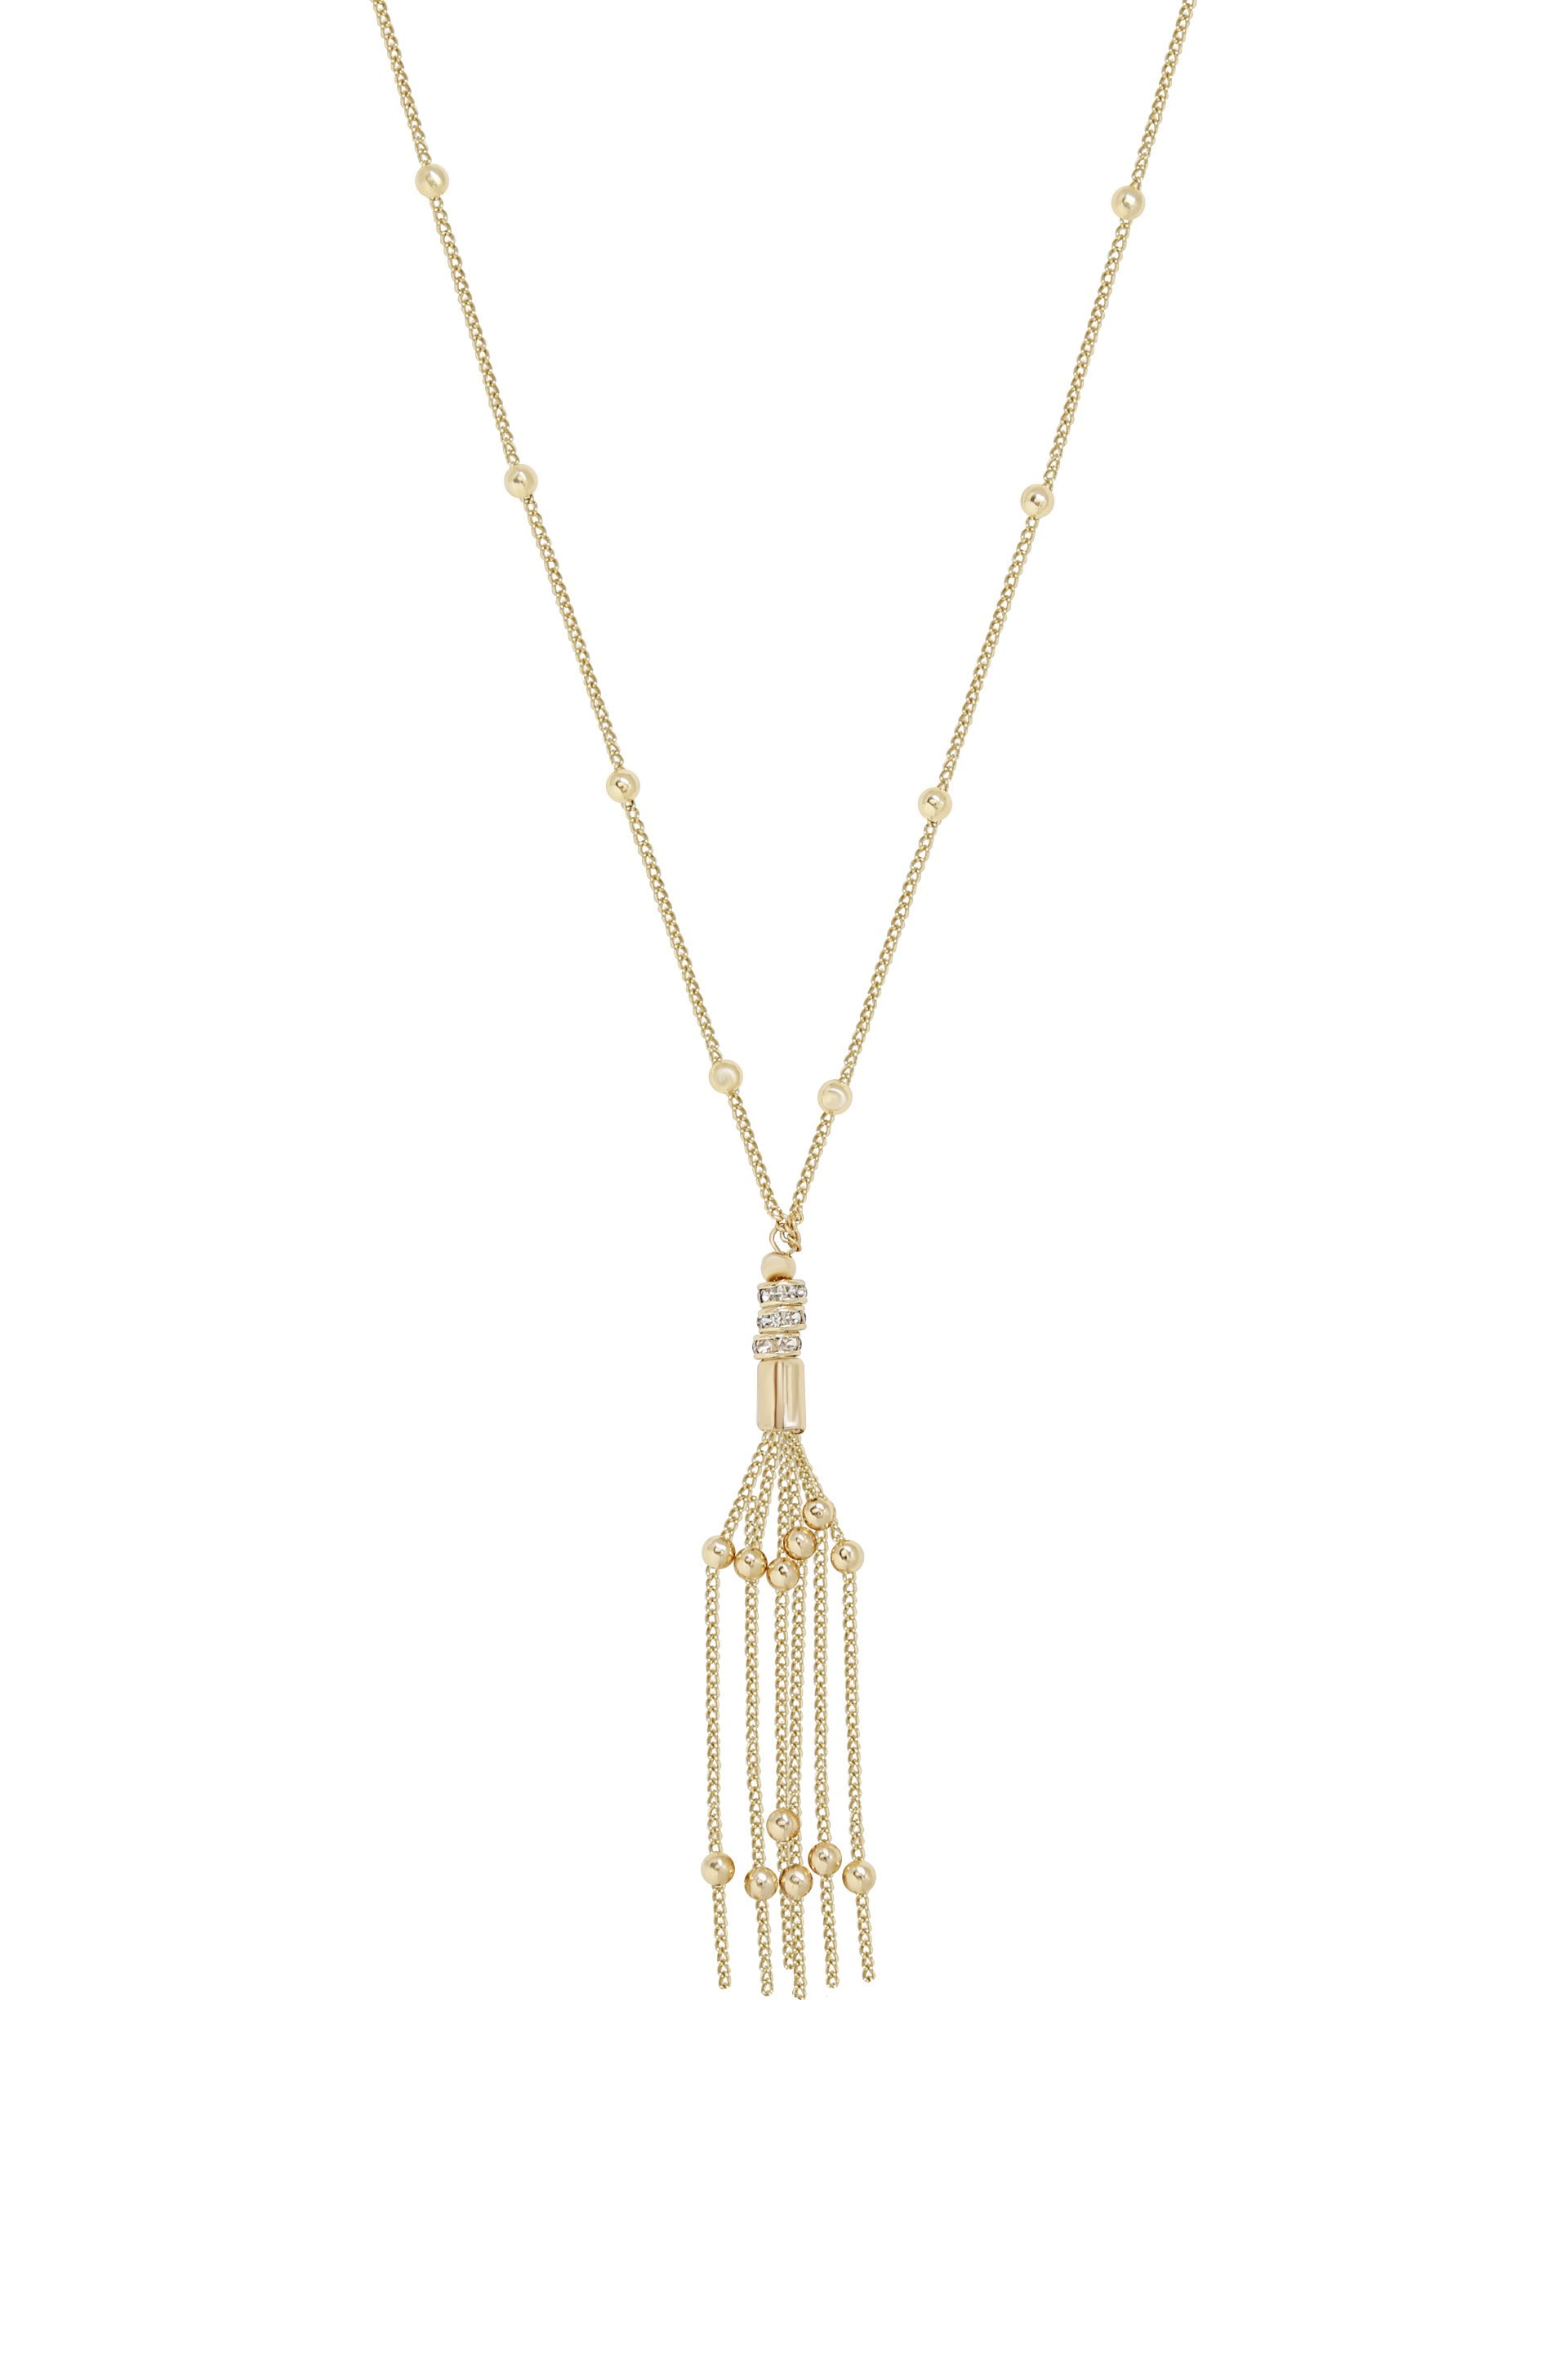 NEW Designer Style Silver Filigree Crystals Gold Cable Ball Tassel Long Necklace 